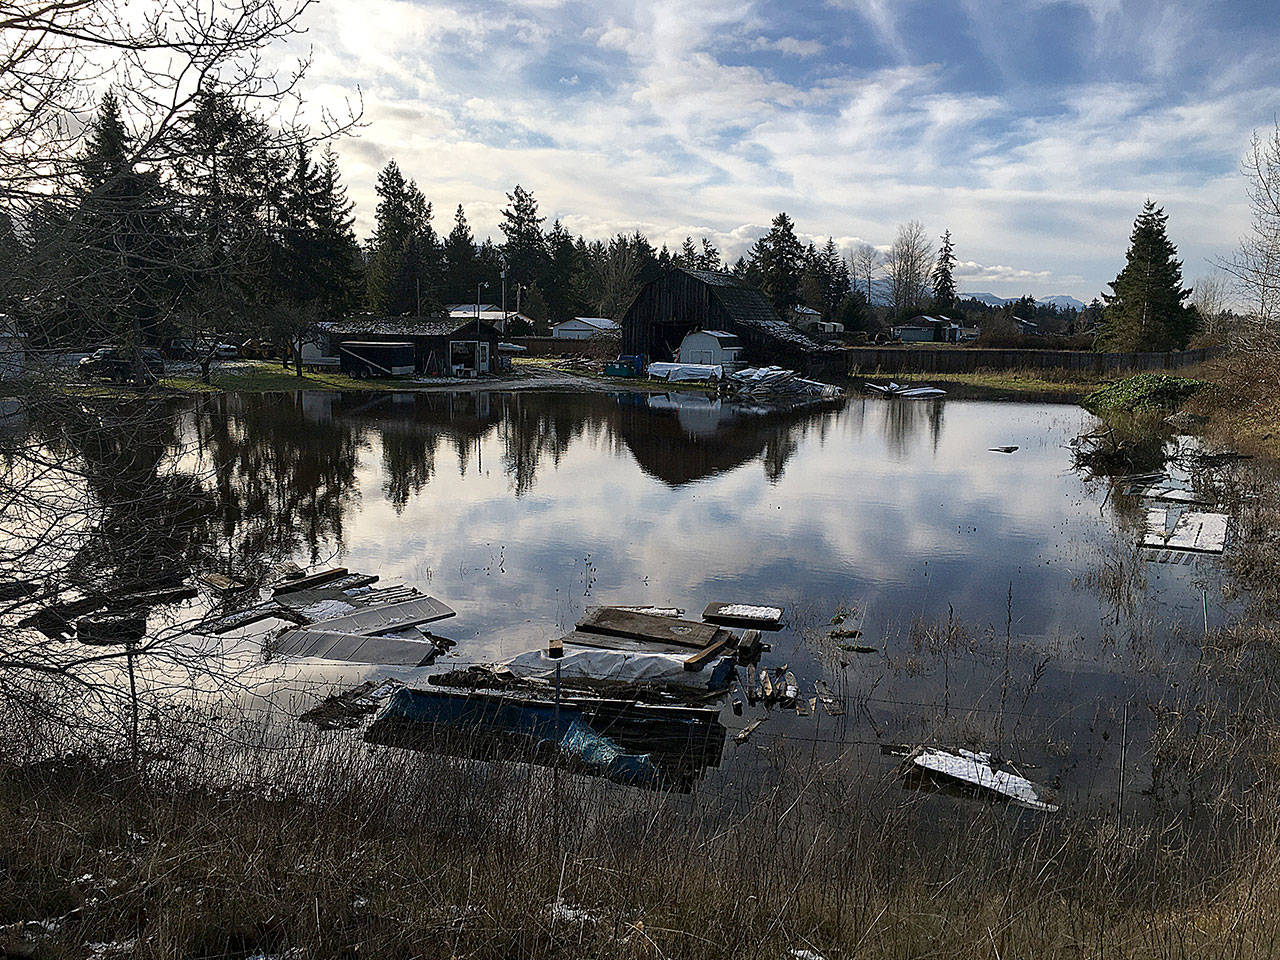 Portions of Seventh Avenue, including the 900 block of South Seventh Avenue, saw flooding from heavy rains, blocked storm drains and/or flooded stormwater ponds on Dec. 21. Sequim Gazette photo by Matthew Nash